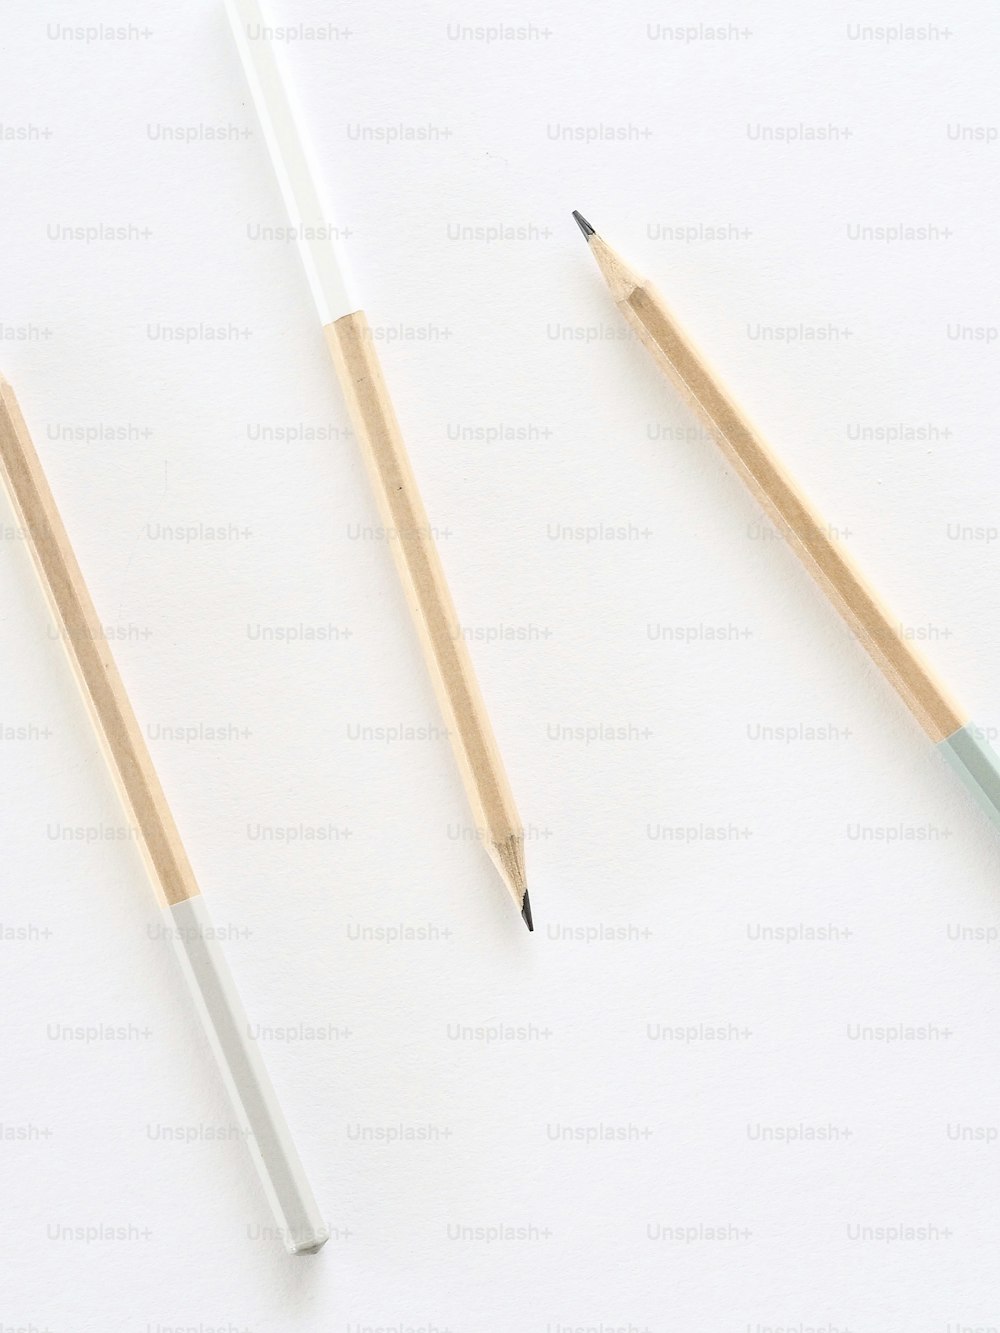 two pencils and a pencil sharpener on a white surface